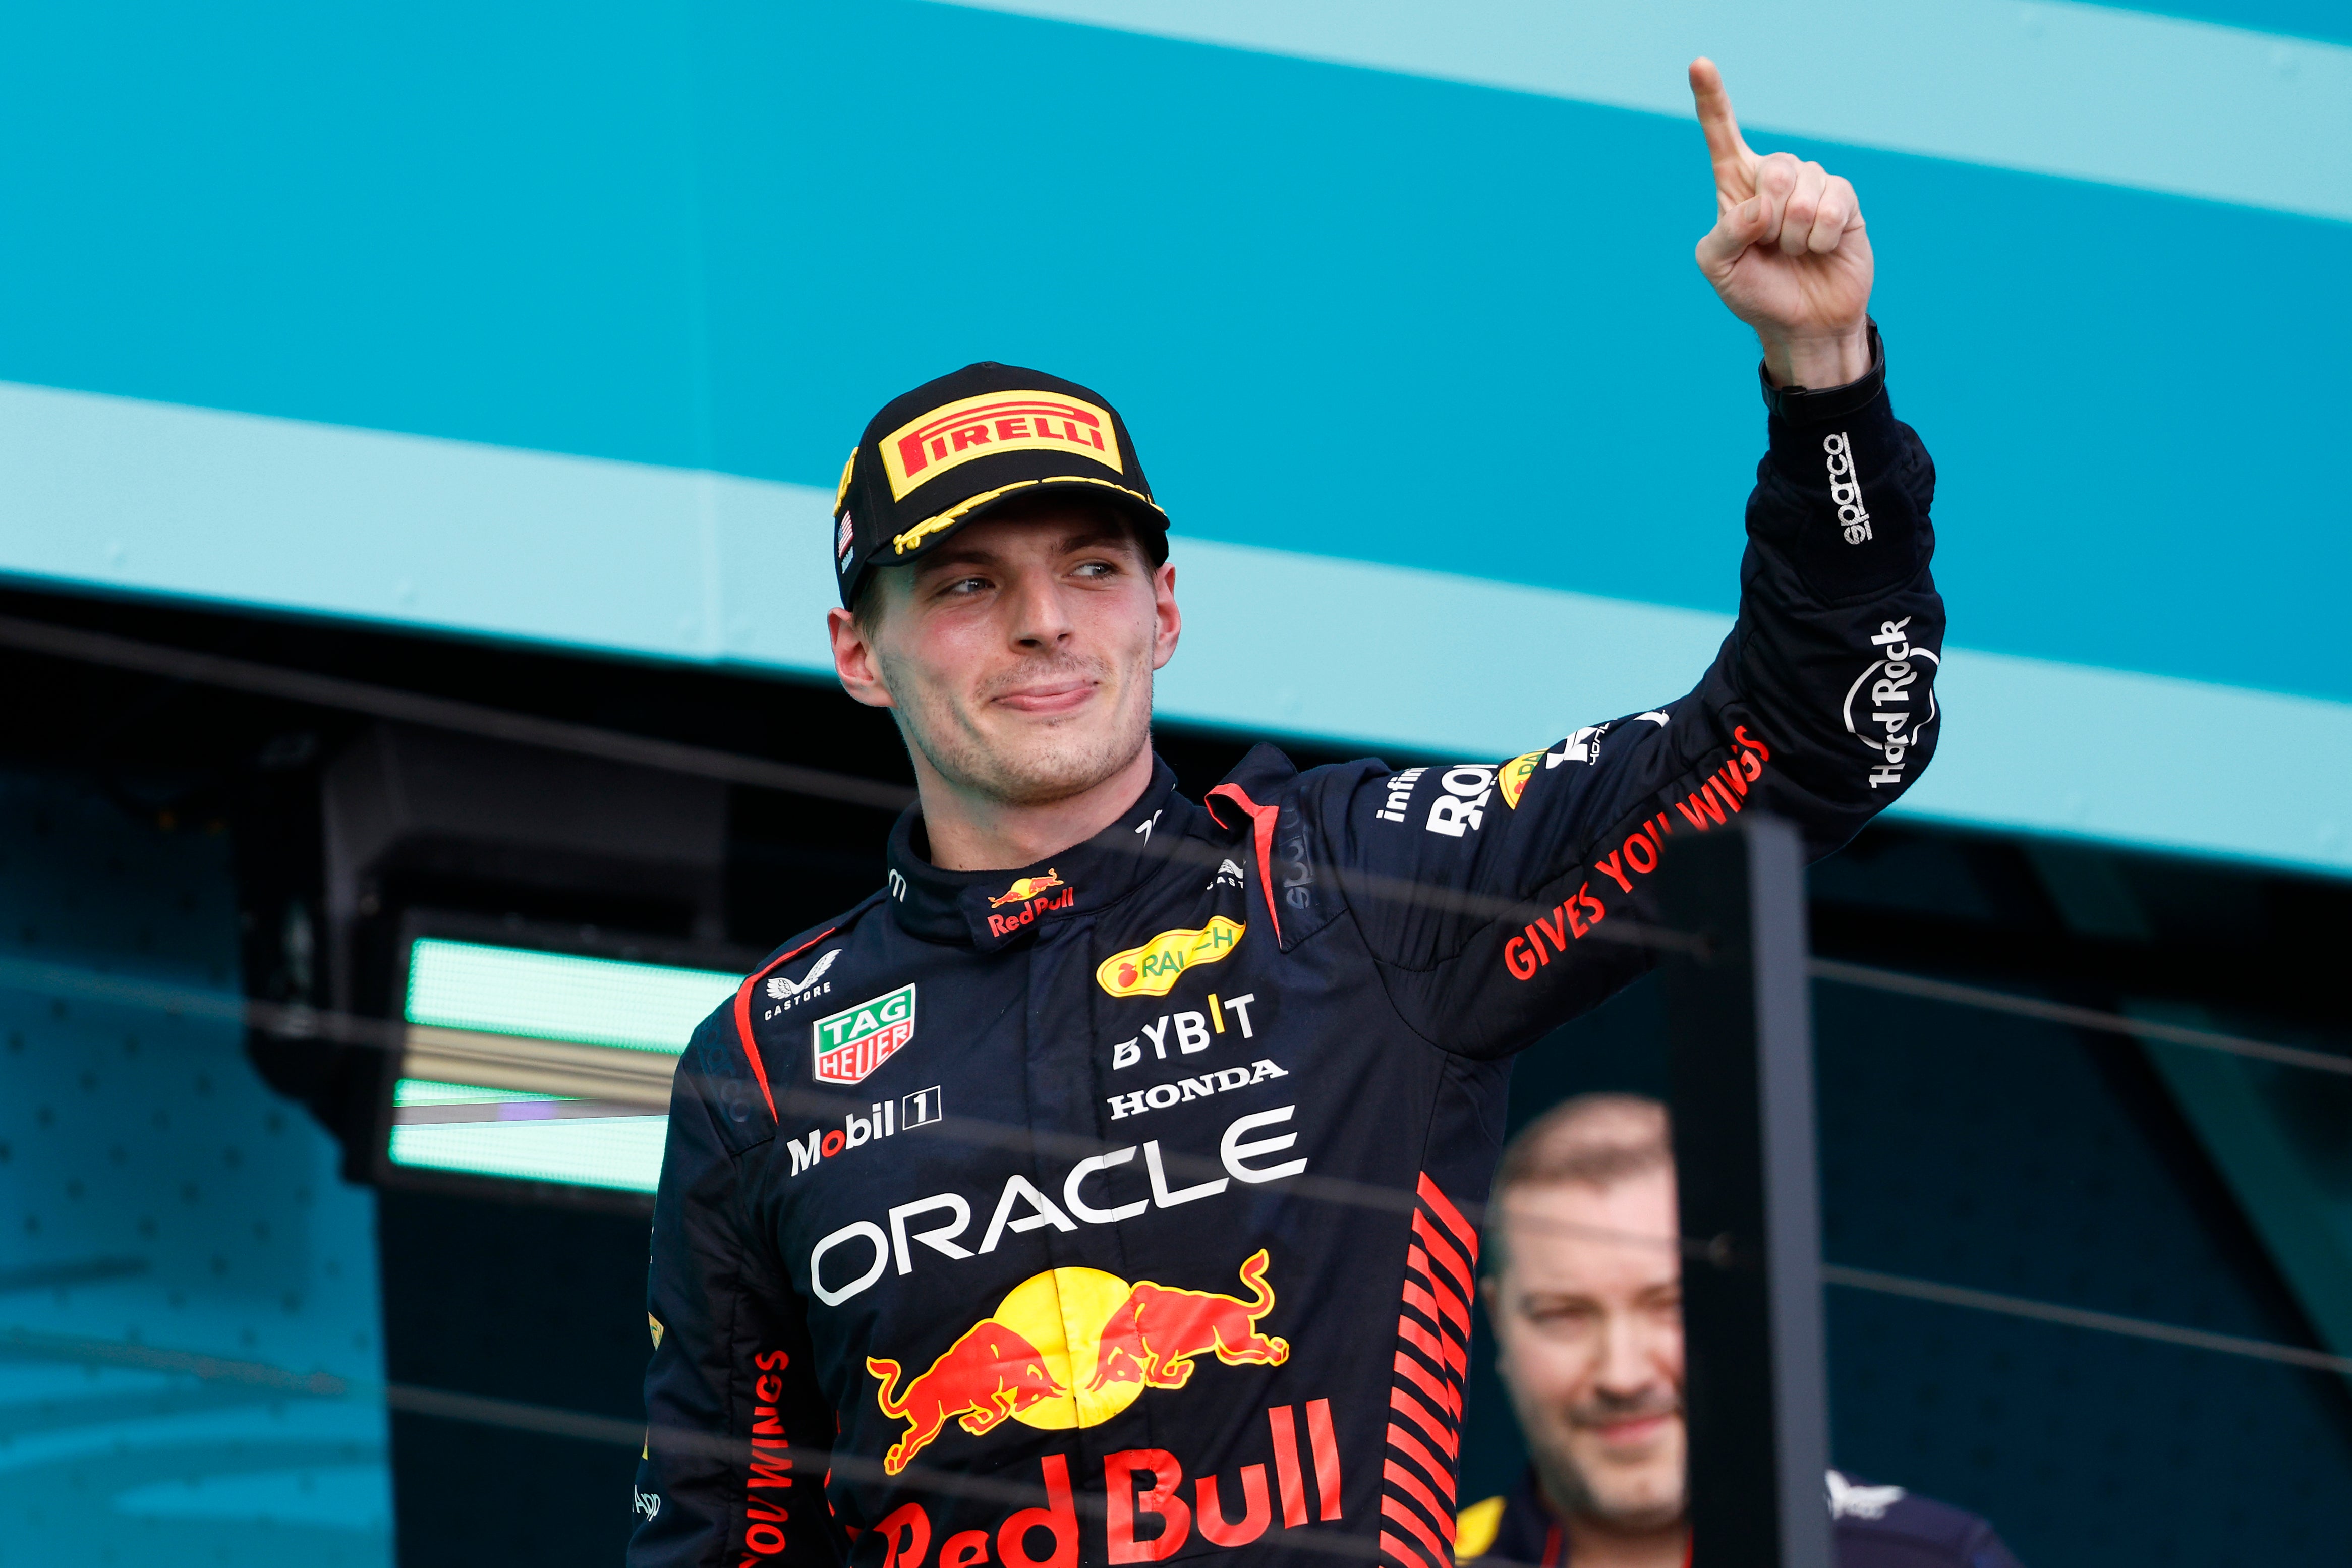 Max Verstappen said he is targeted by F1’s boo brigade because they are jealous of him winning